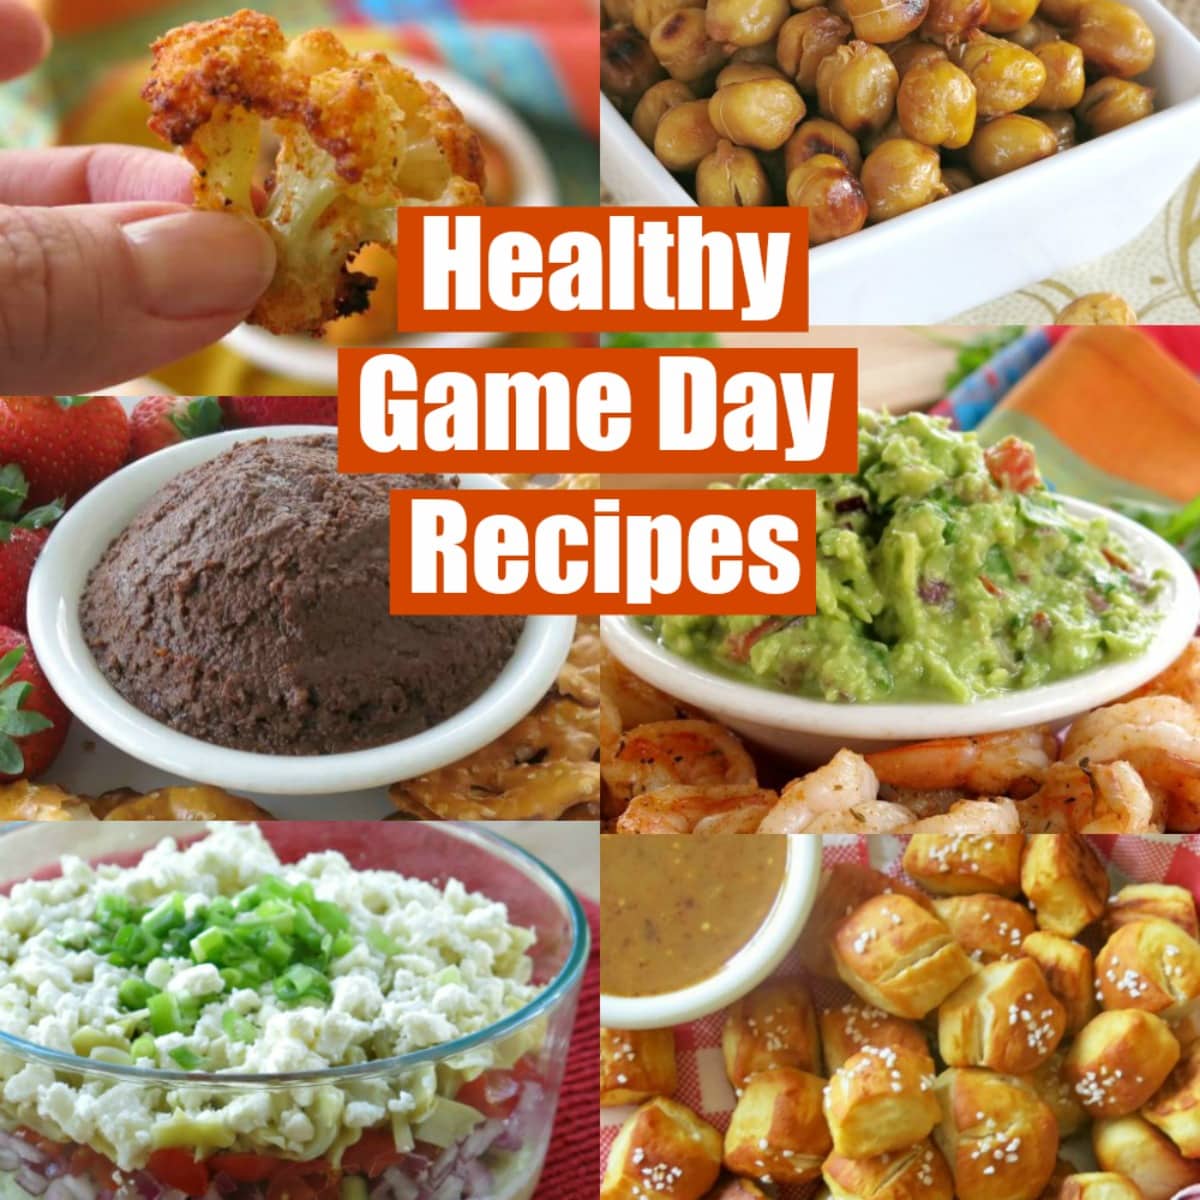 Picture collage of healthy game day recipes including cauliflower bites, buffalo chickpeas, guacamole, and pretzel bites.